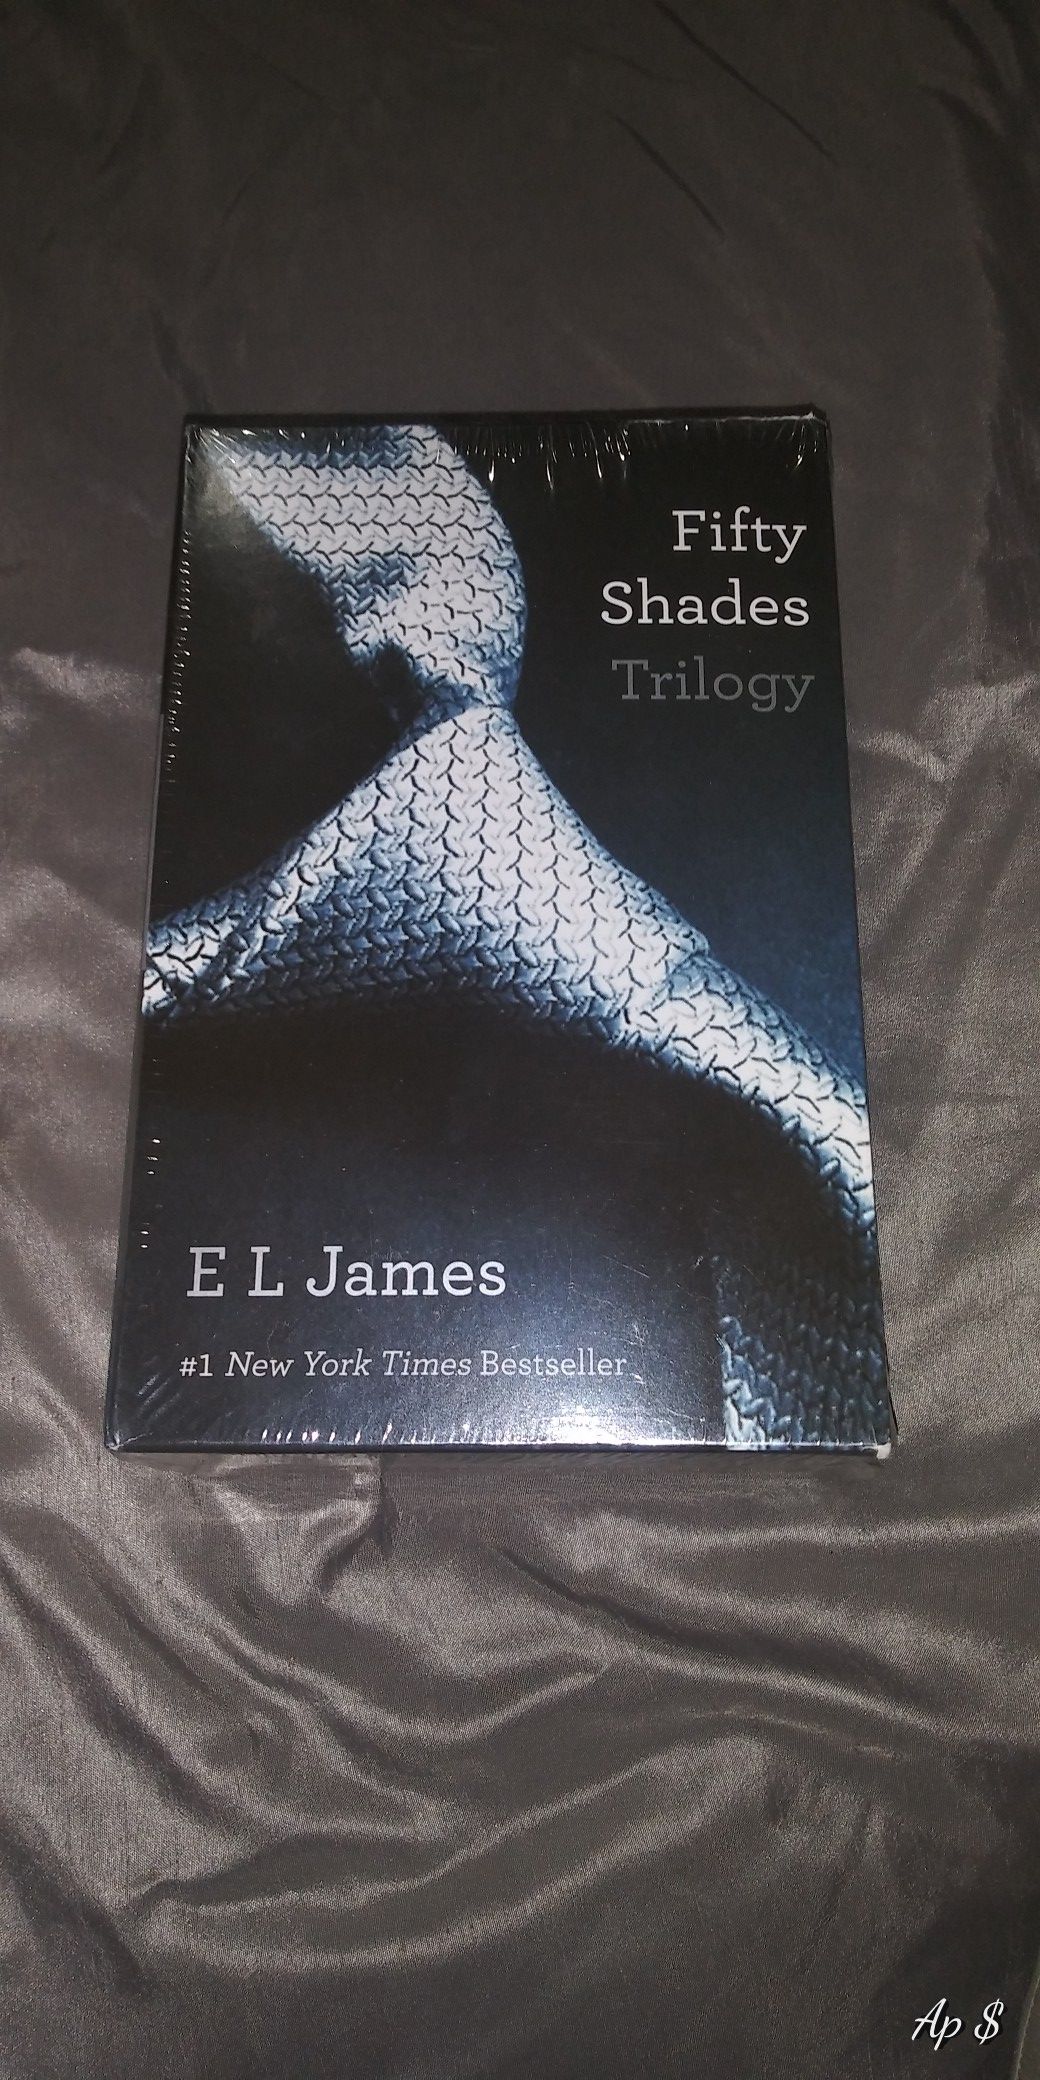 Fifty shades Trilogy